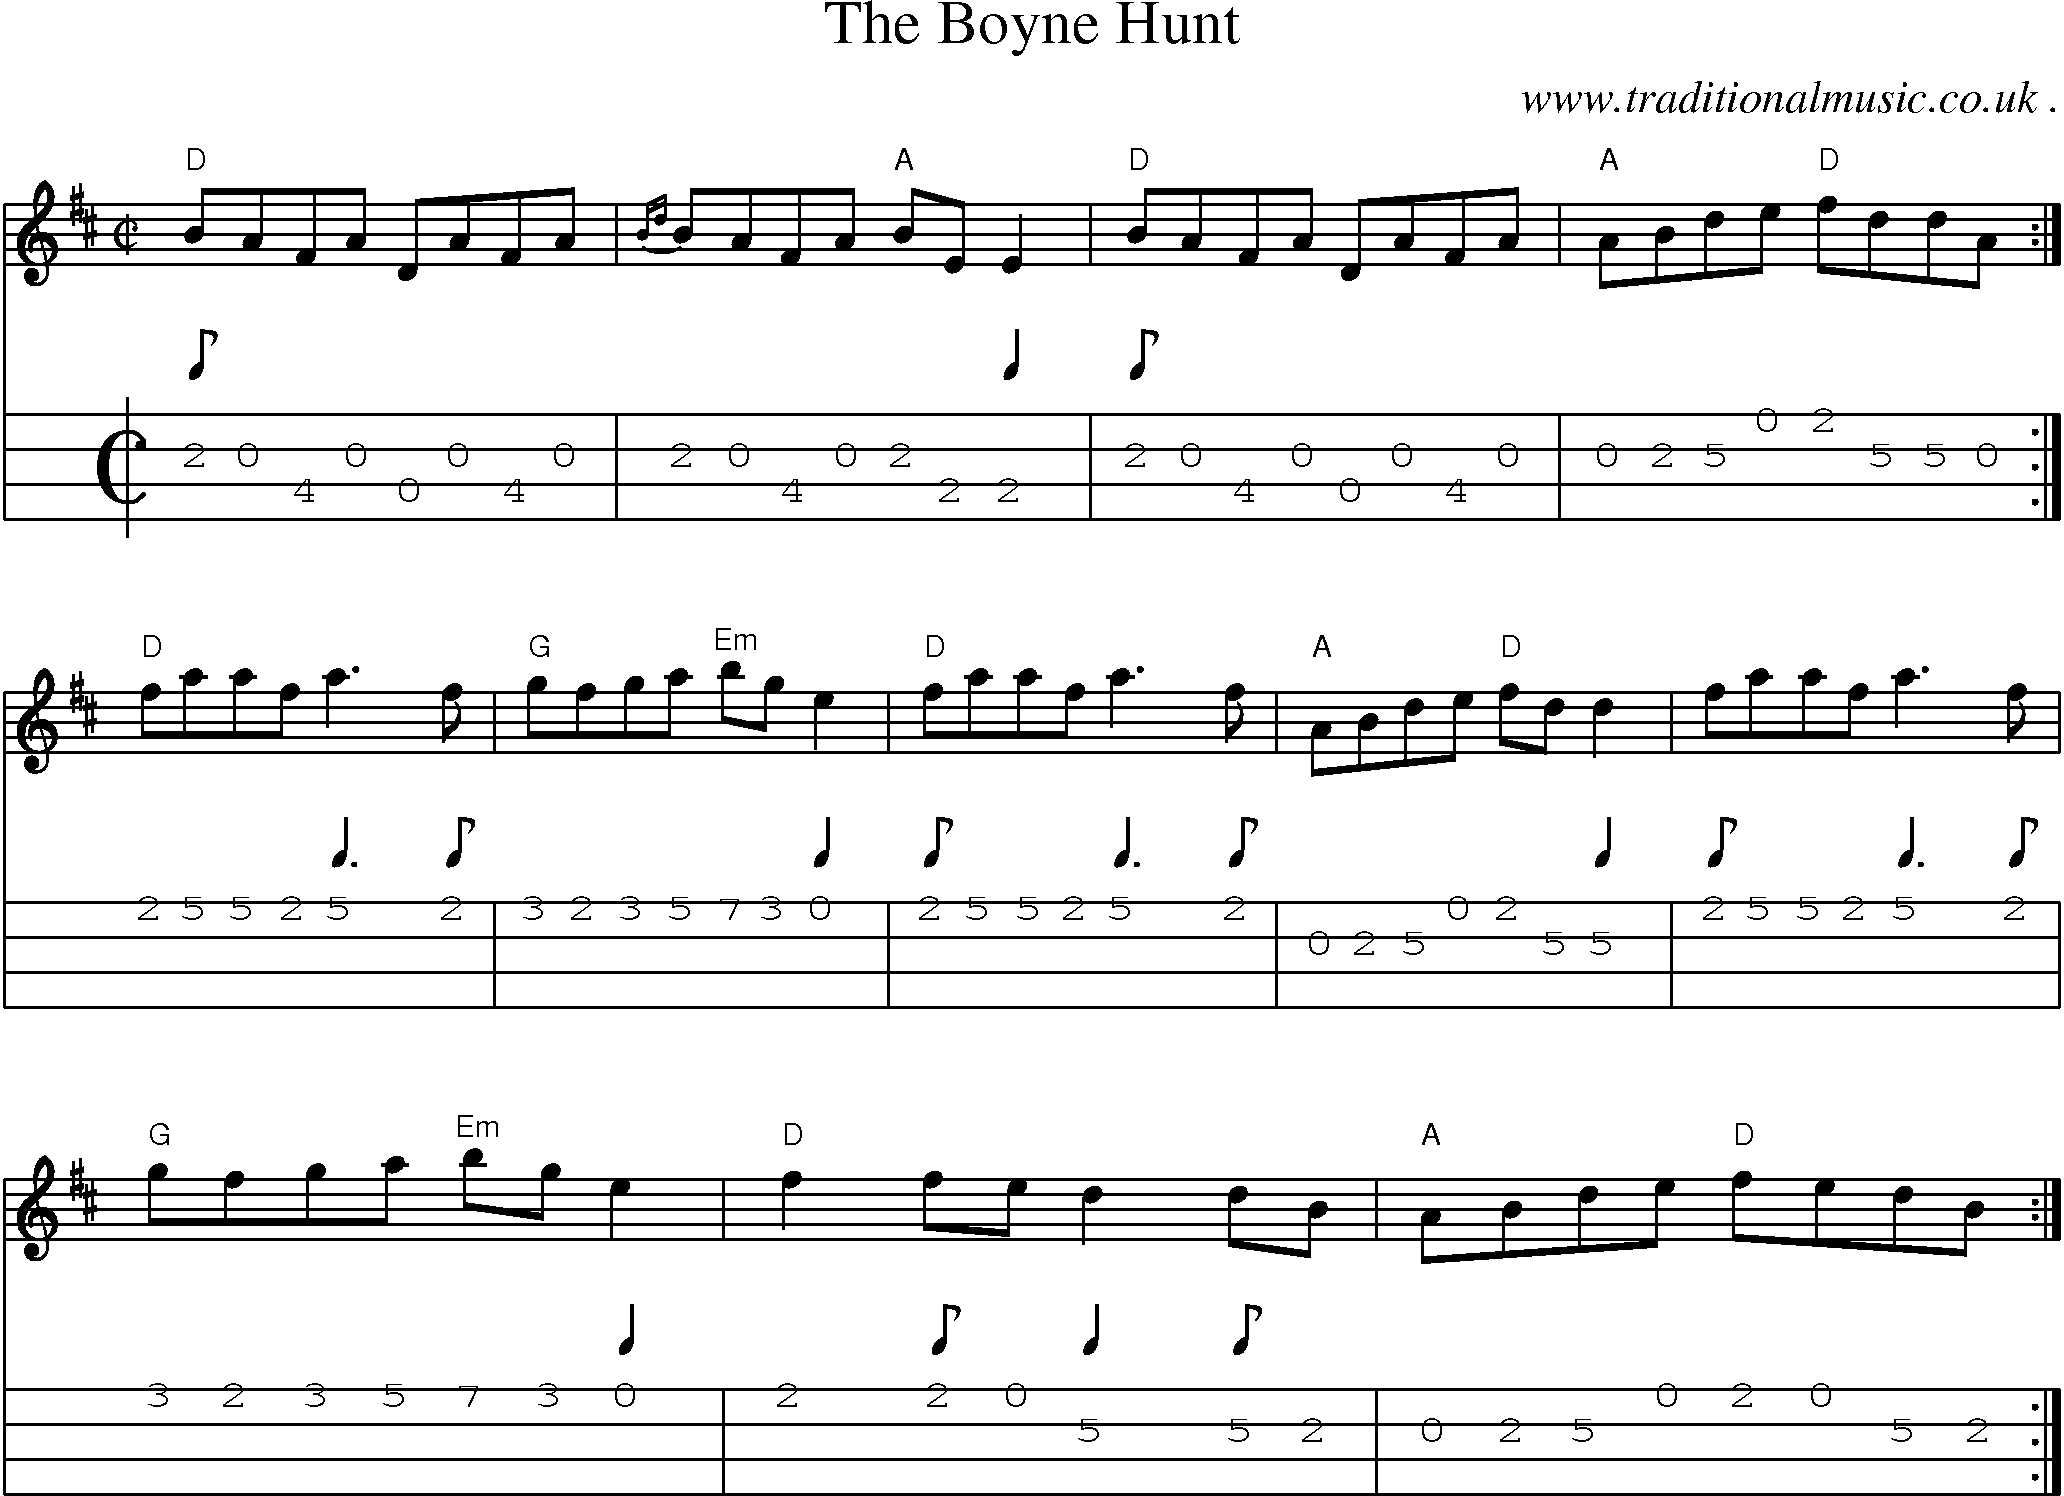 Music Score and Guitar Tabs for The Boyne Hunt